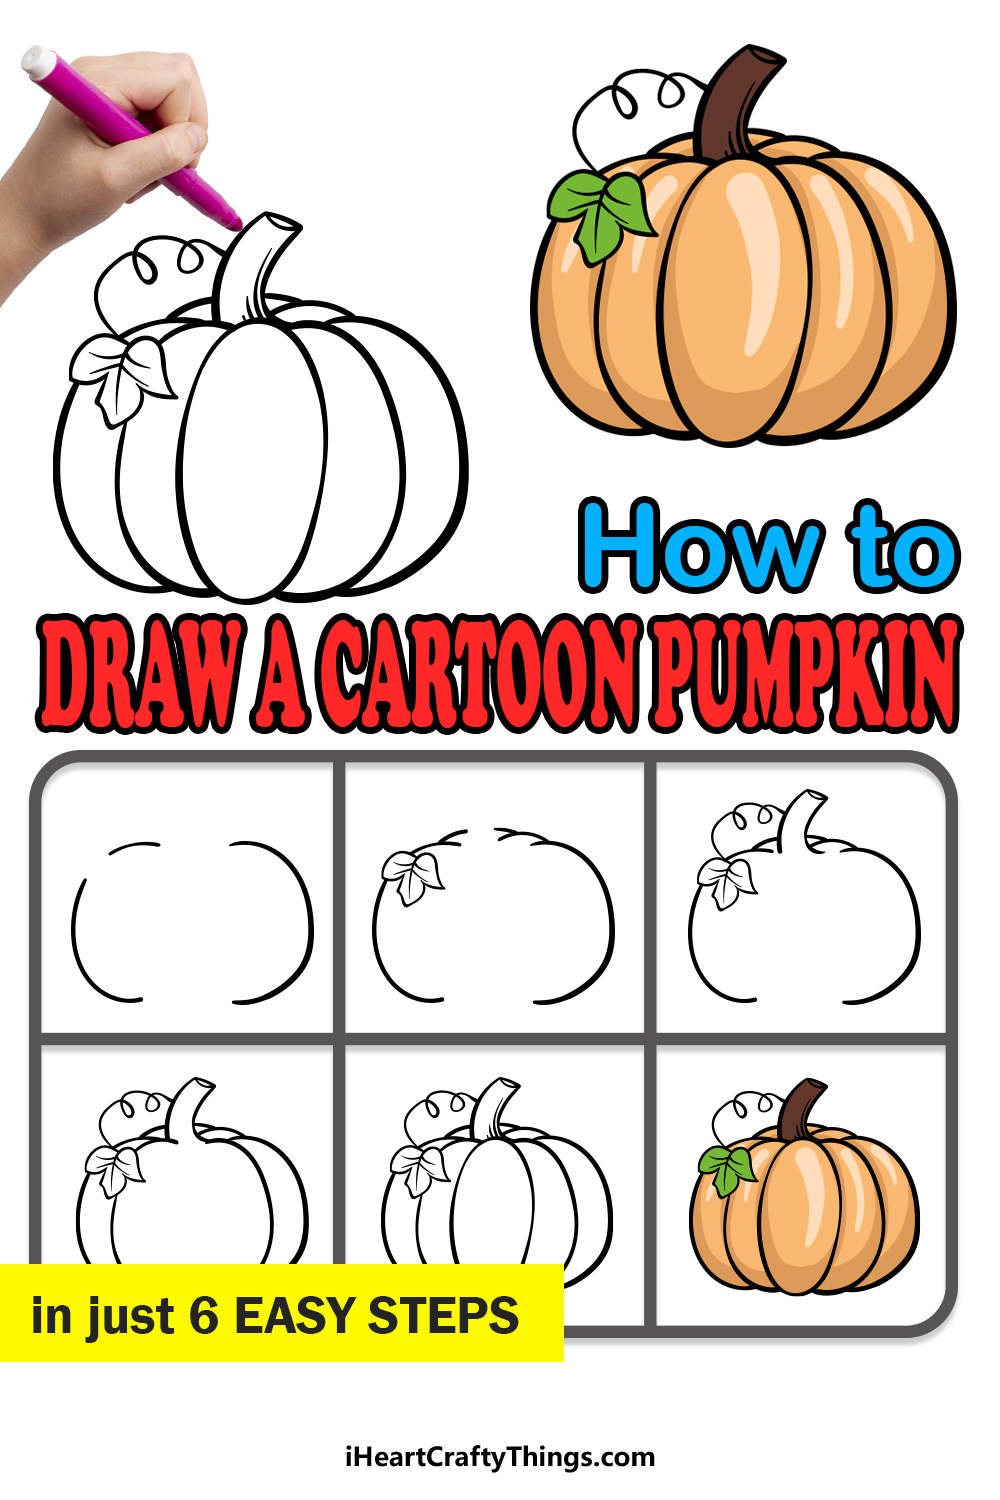 how to draw a cartoon pumpkin in 6 easy steps